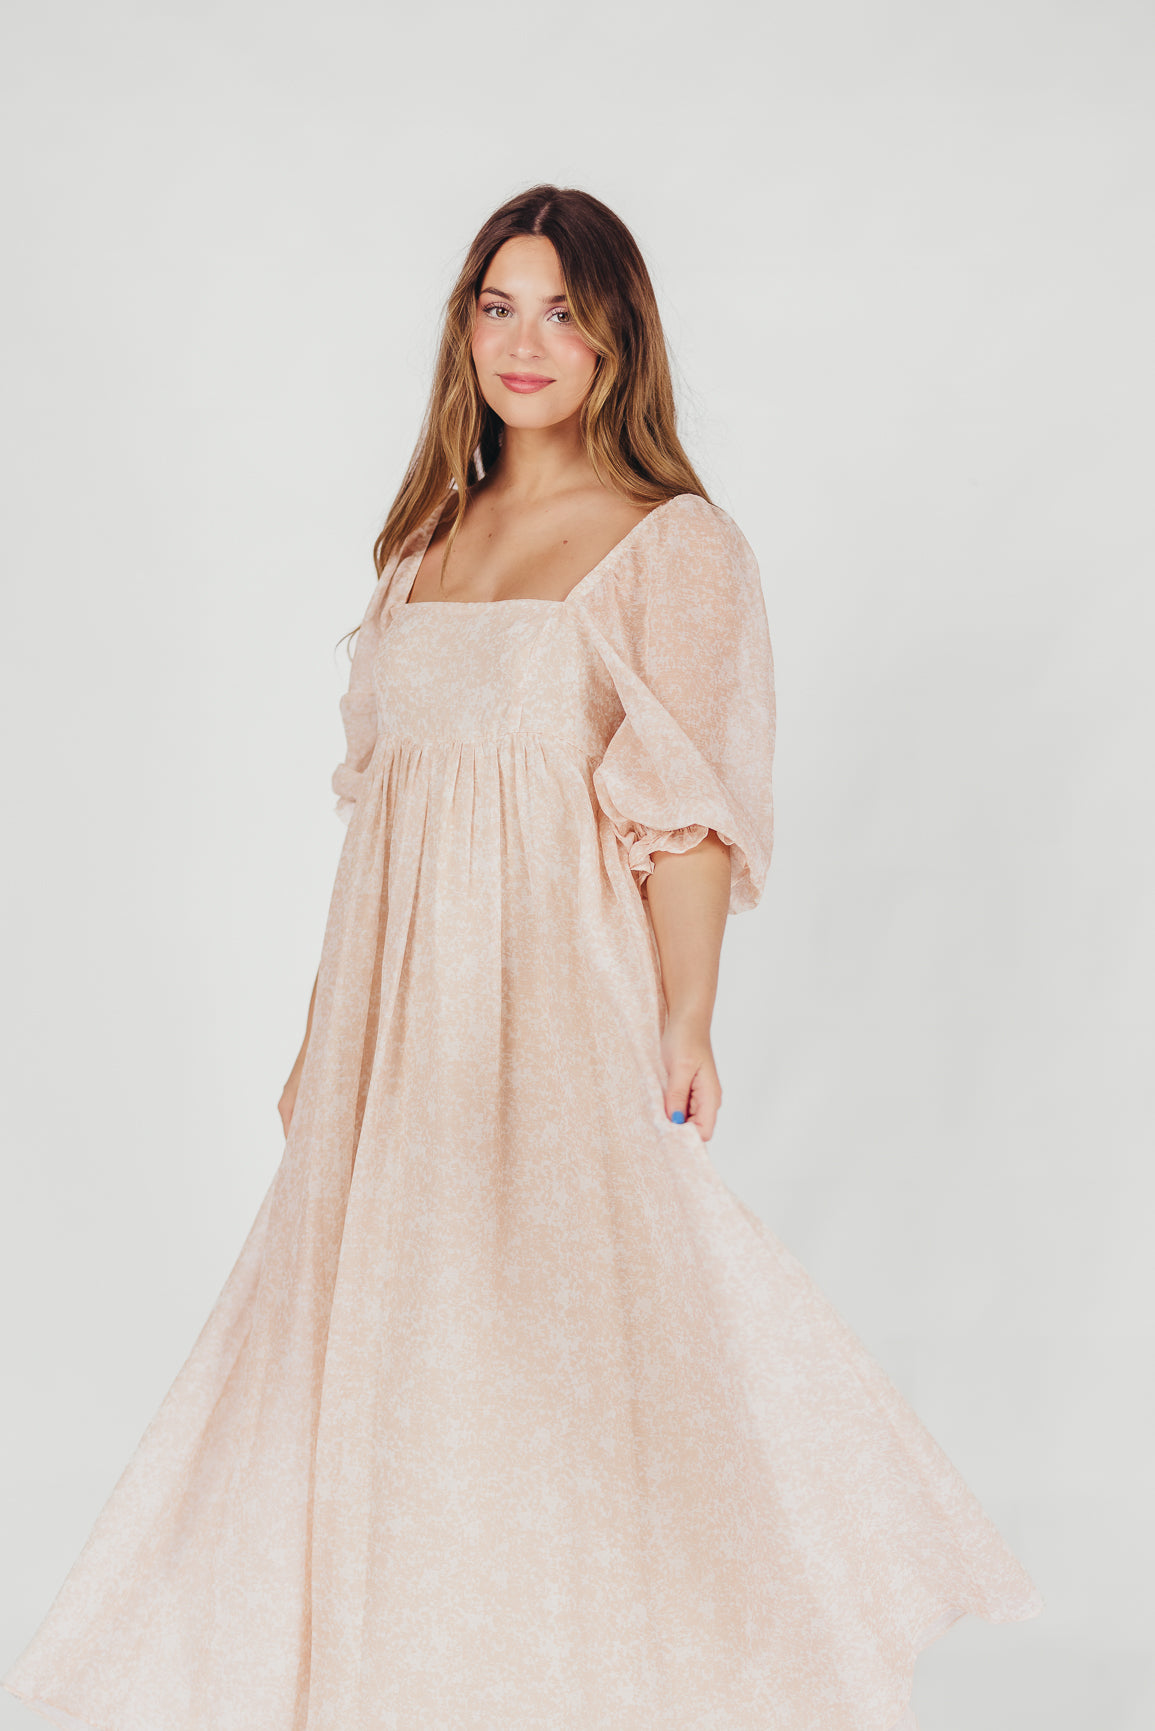 *New* Mona Maxi Dress with Smocking in Light Peach - Bump Friendly & Inclusive Sizing (S-3XL)